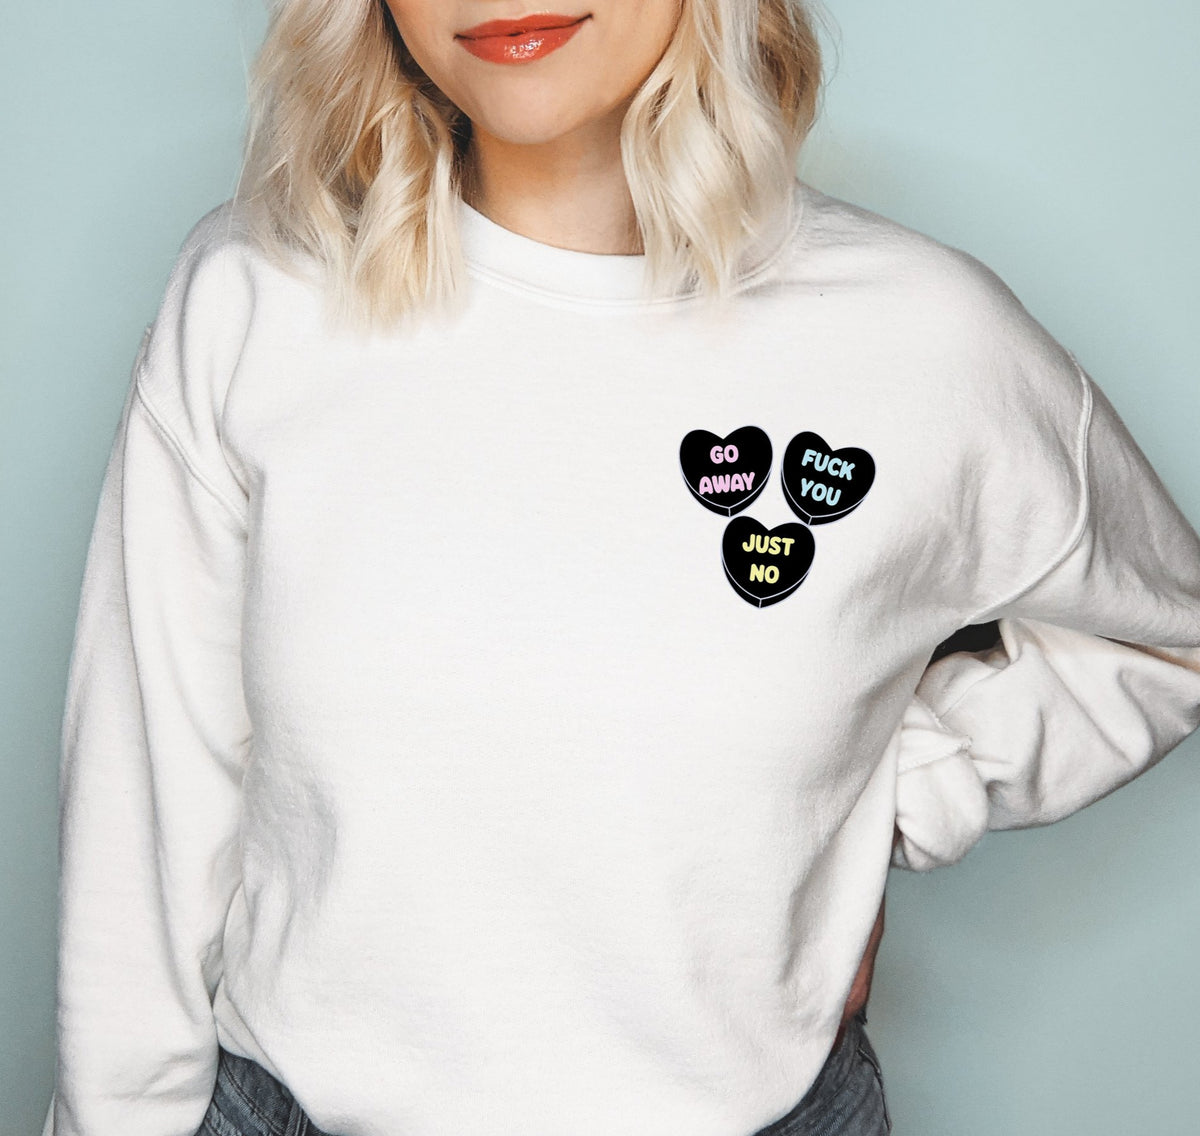 White sweatshirt with candy hearts saying go away fuck you just no - HighCiti